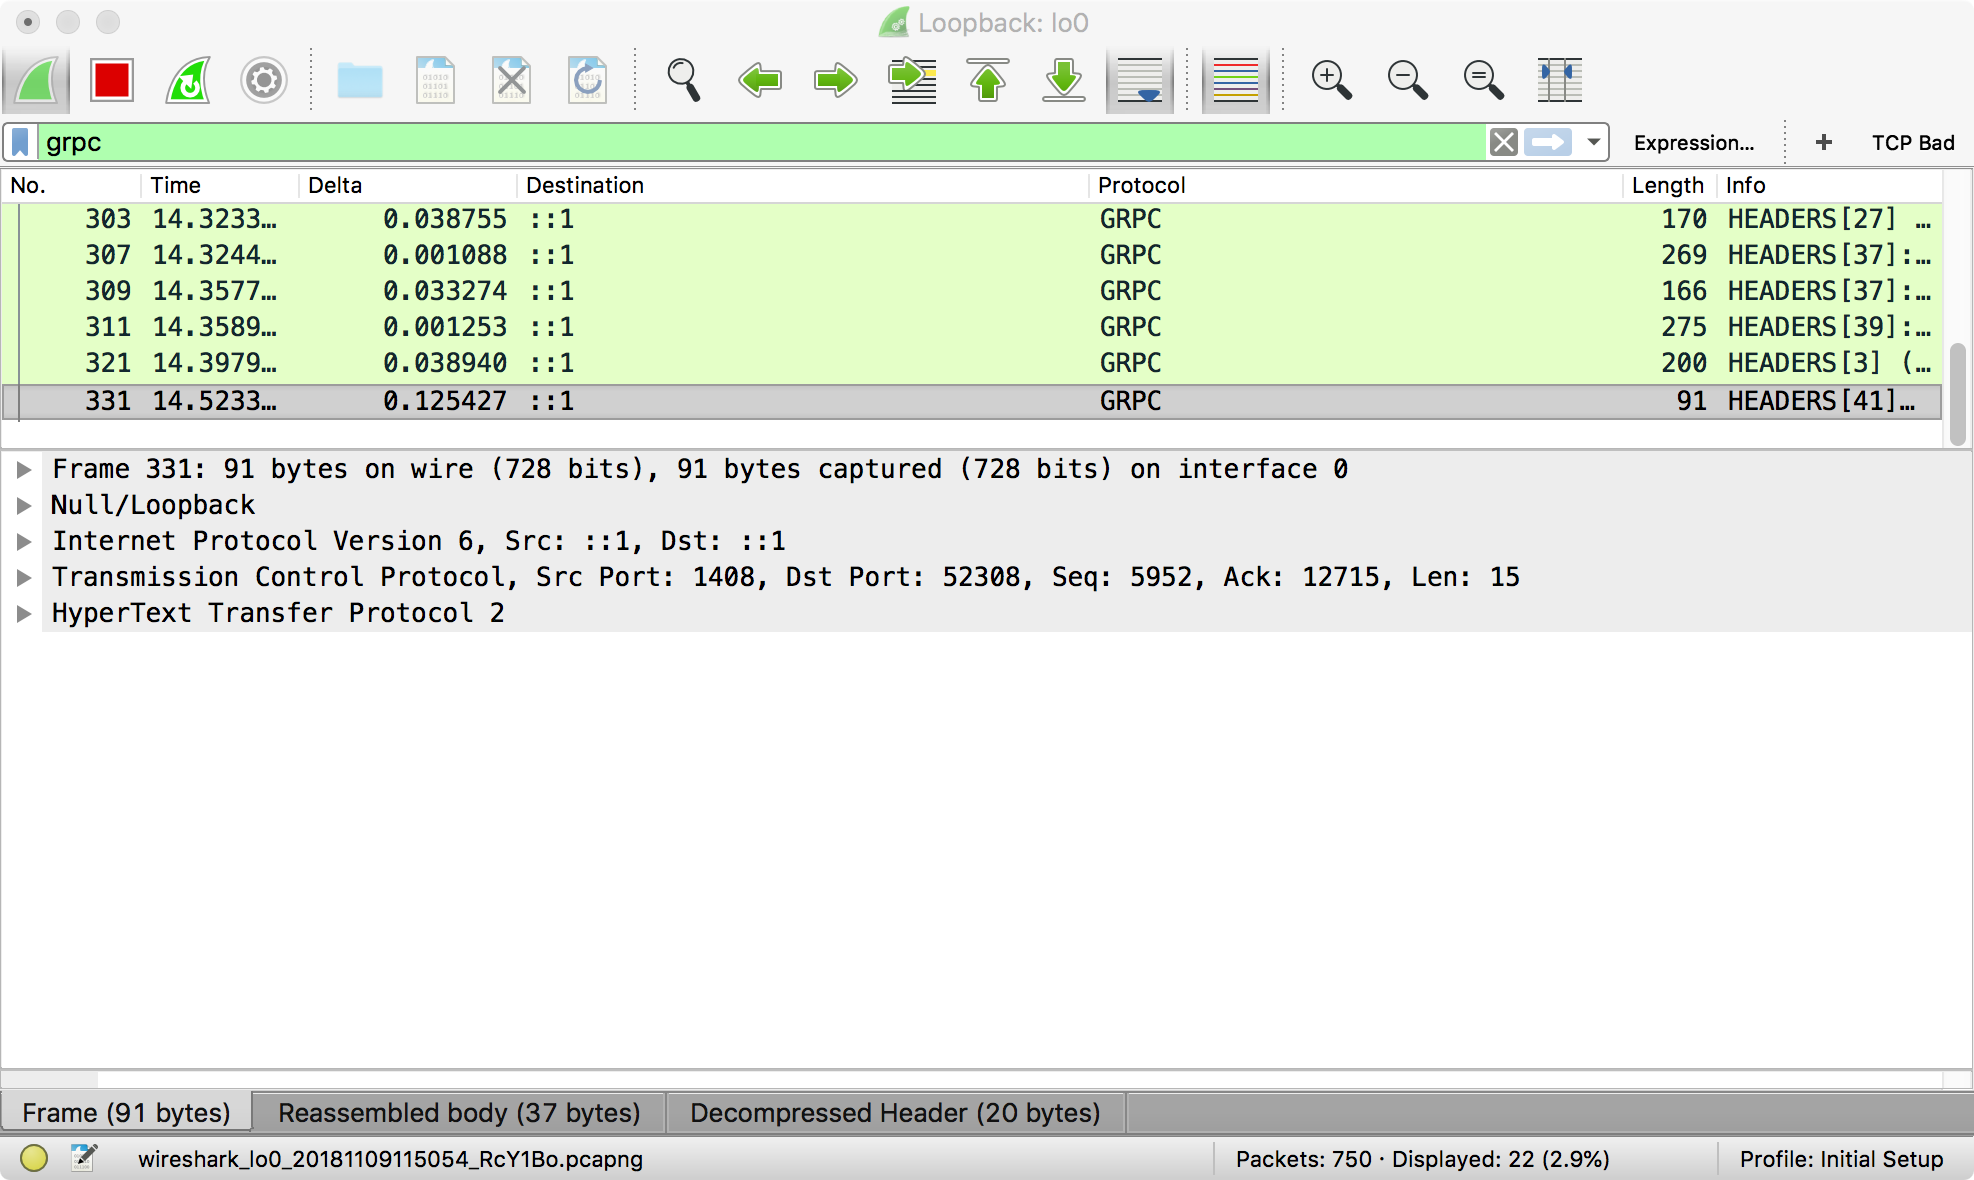 Wireshark image showing gRPC packets